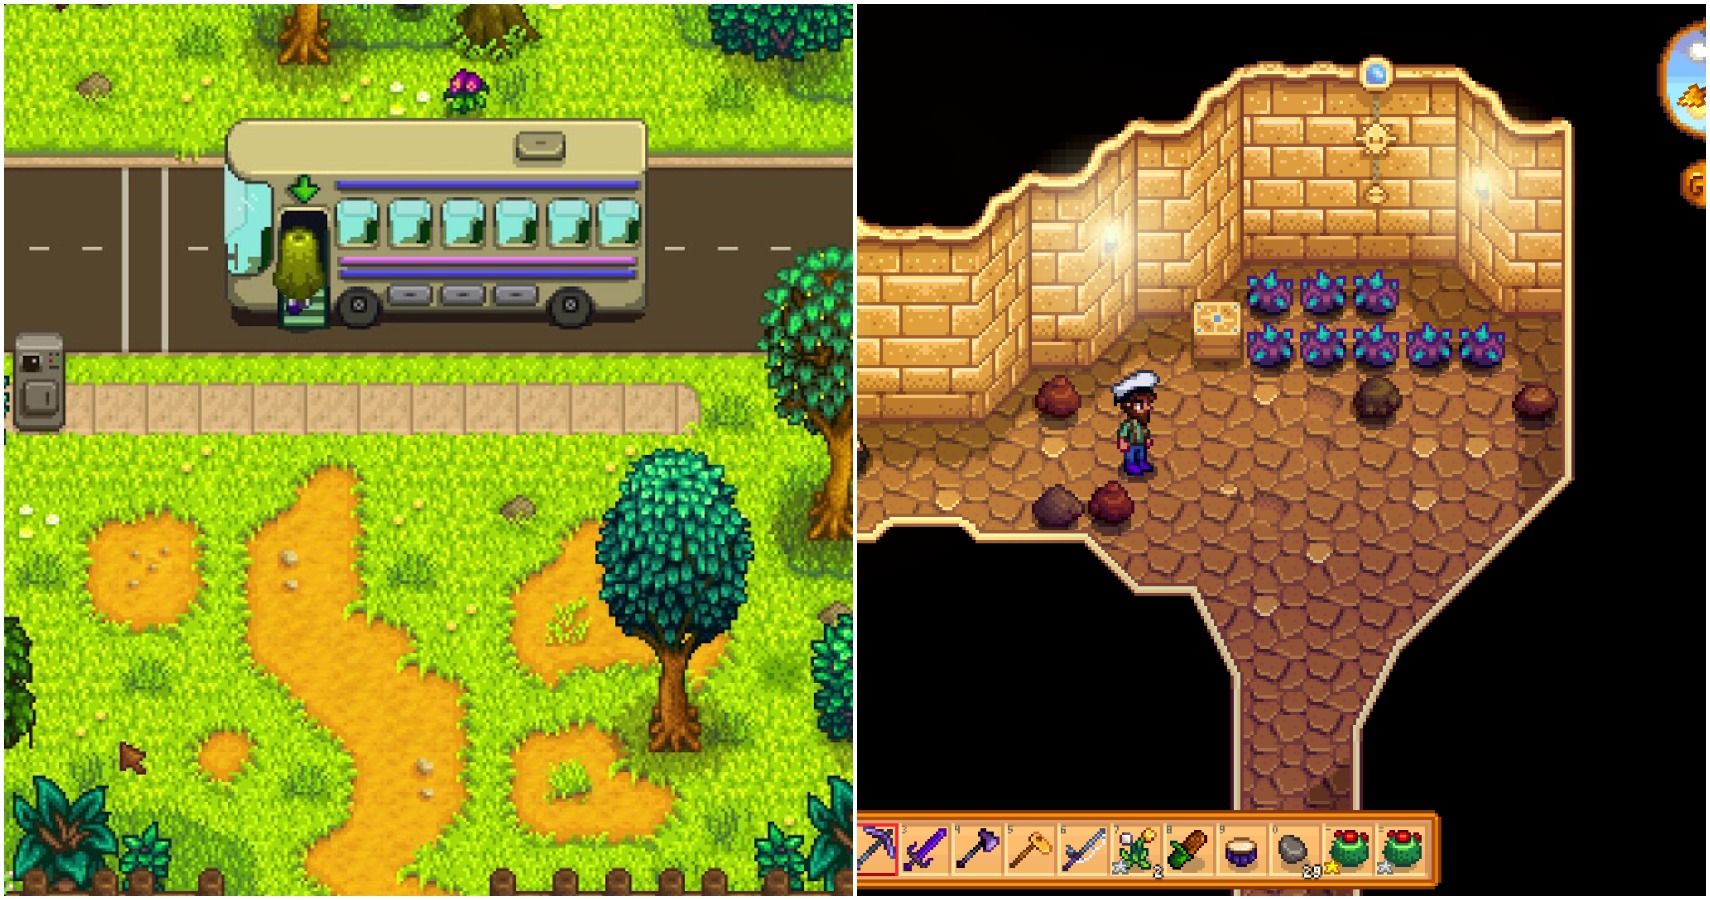 Stardew Valley 15 Tips For Getting To Level 100 Of Skull Cavern